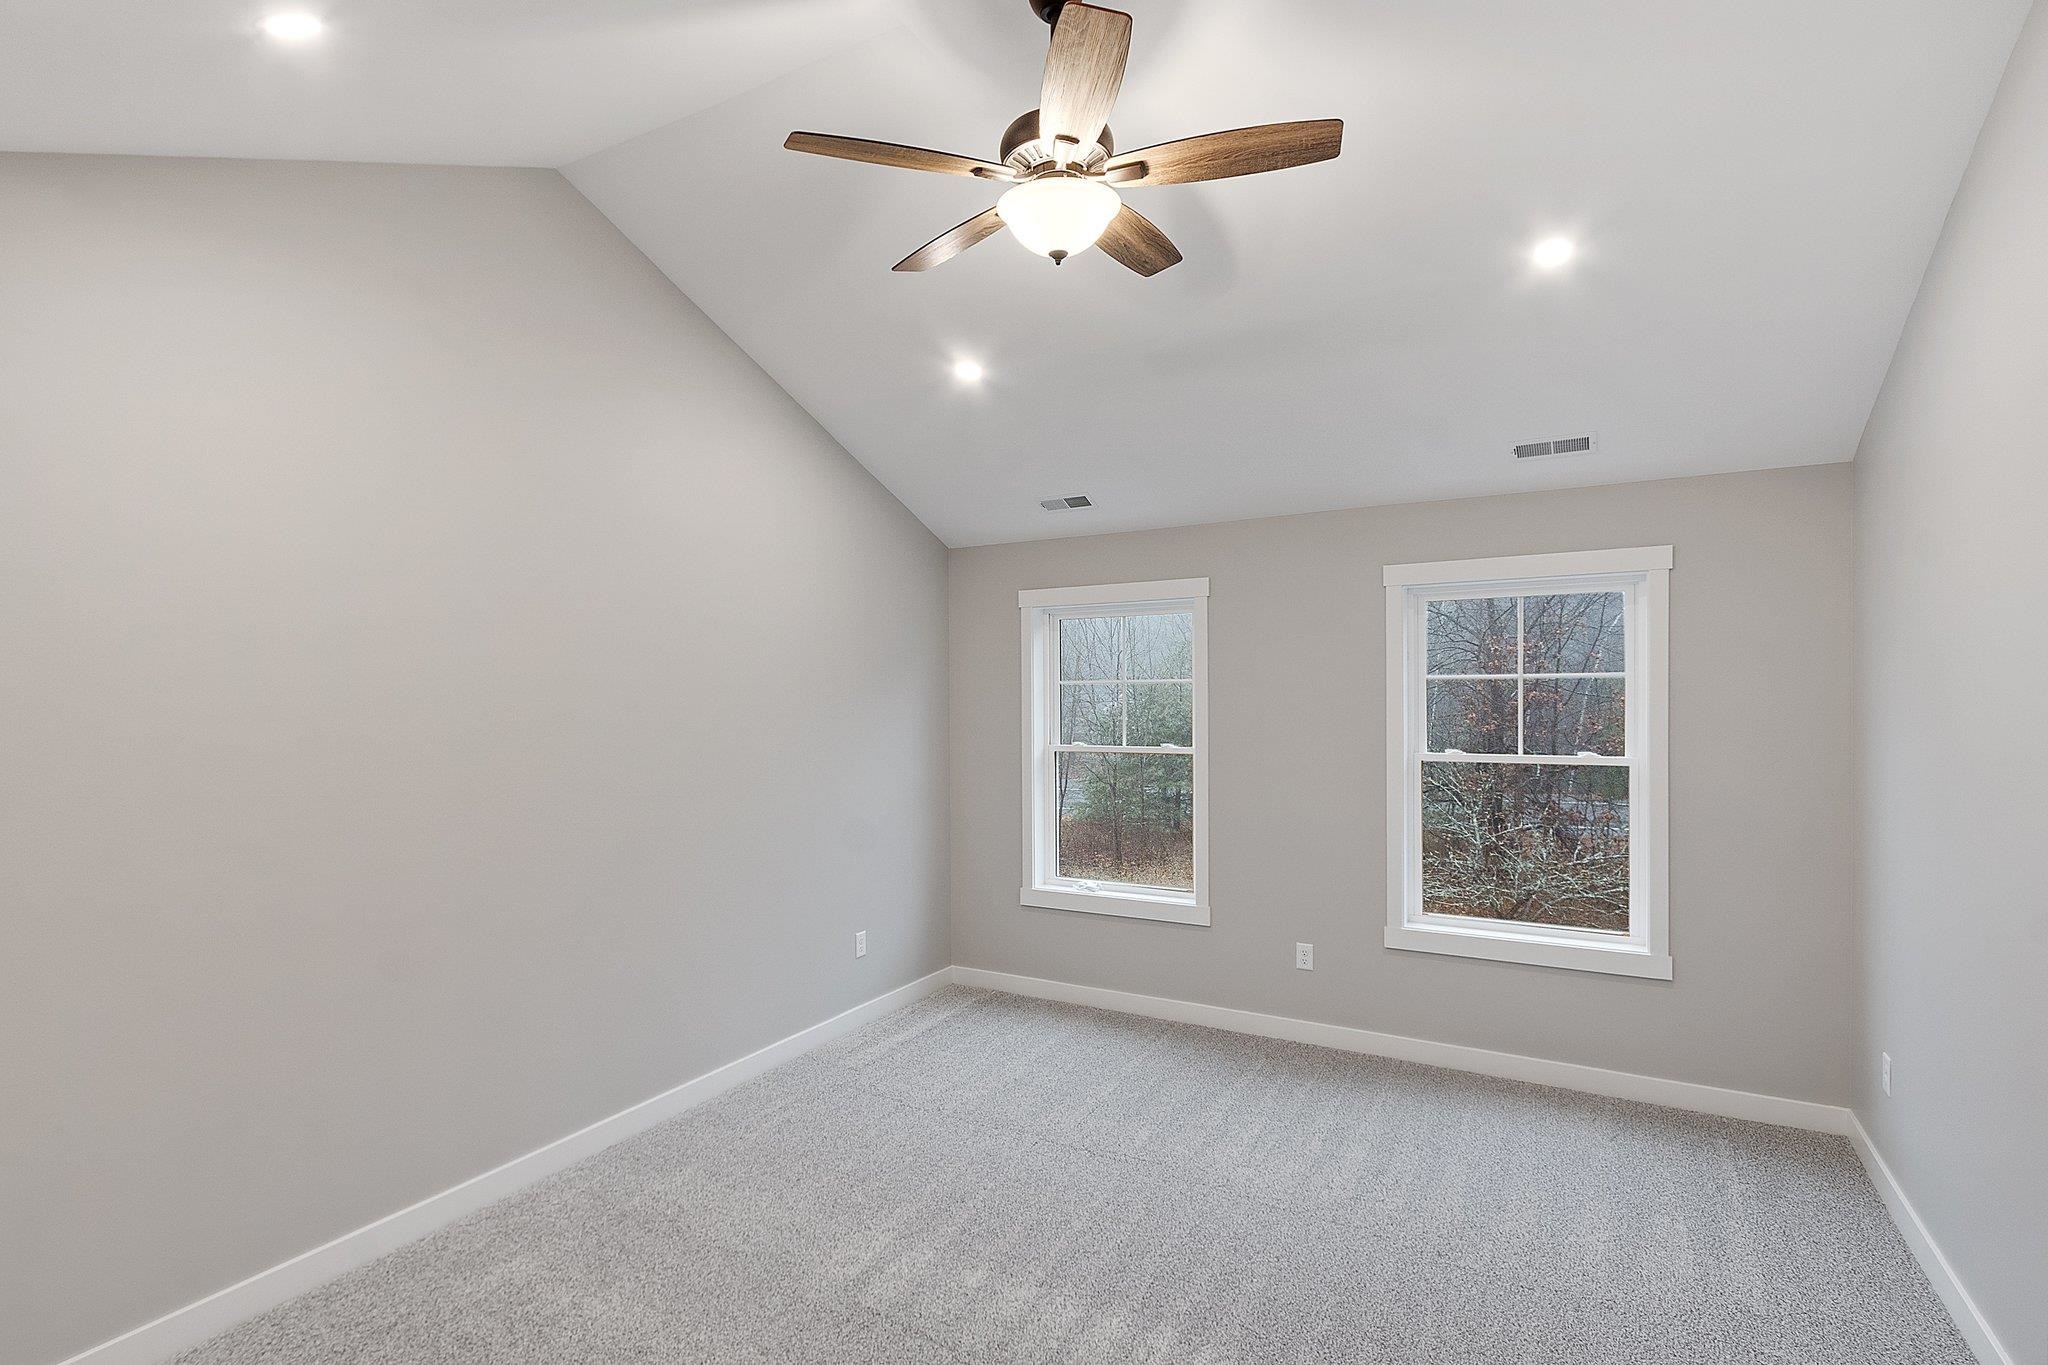 MAIN BEDROOM WITH RECESSED LIGHTING